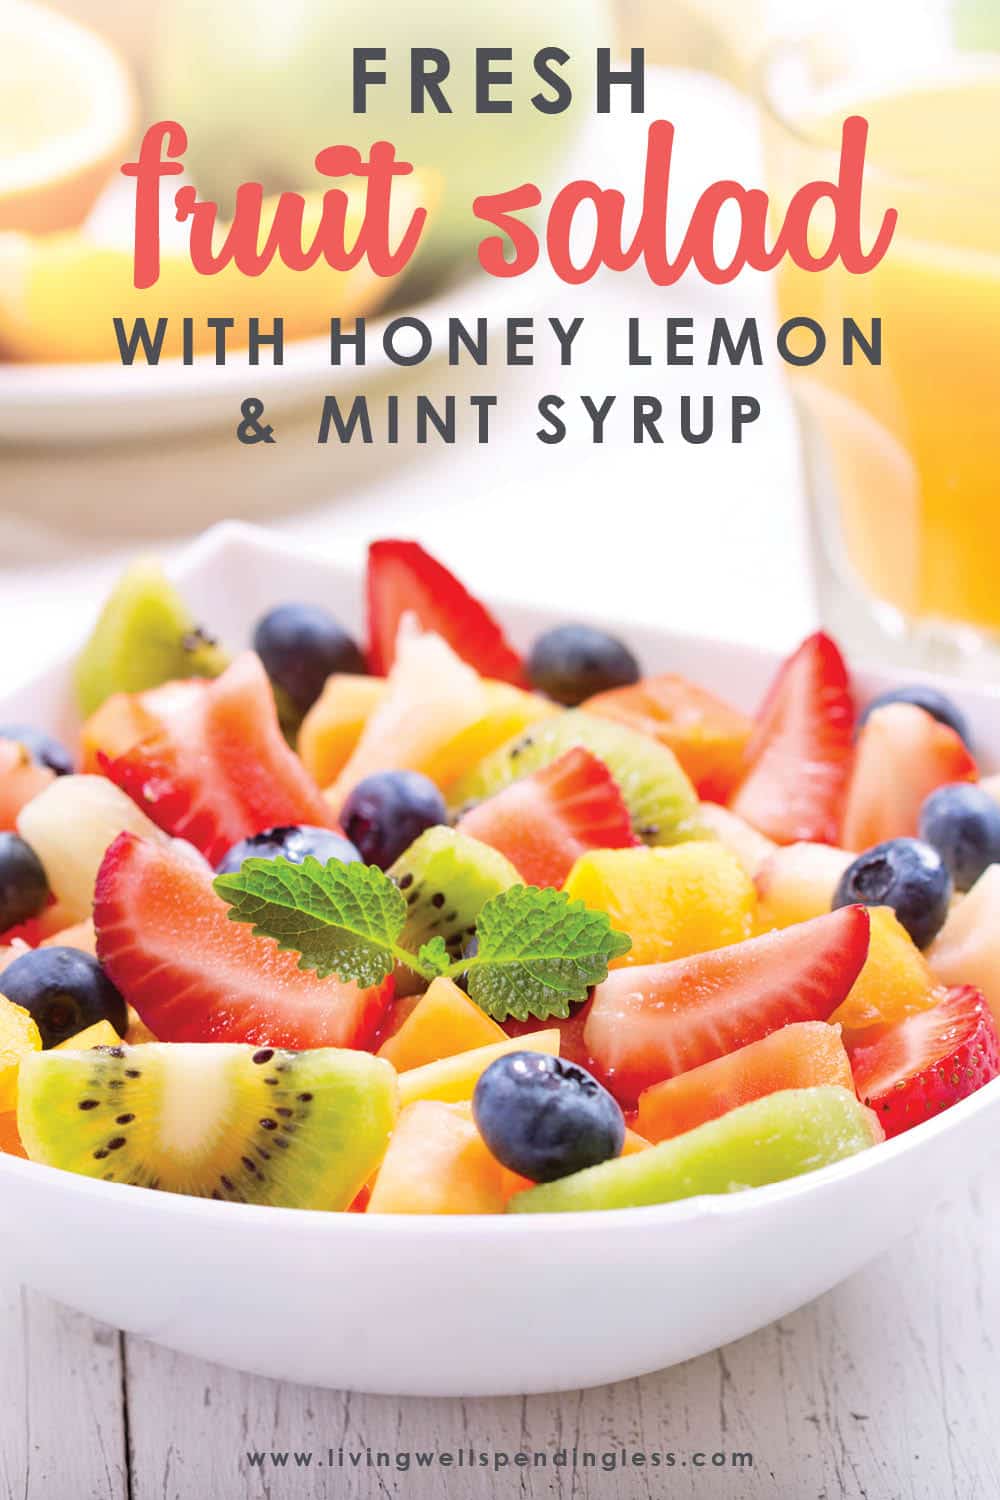 Looking for a healthy fruit recipe that's tasty too? This fruit salad with honey lemon-mint syrup is full of fresh flavors everyone will enjoy! Perfect for a summer picnic, carry-in, or for a weekday snack. #fruitsalad #fruit #healthyrecipes #healthydesserts #healthysnacks #healthypartyfoods #summer #summerrecipes #summerdesserts